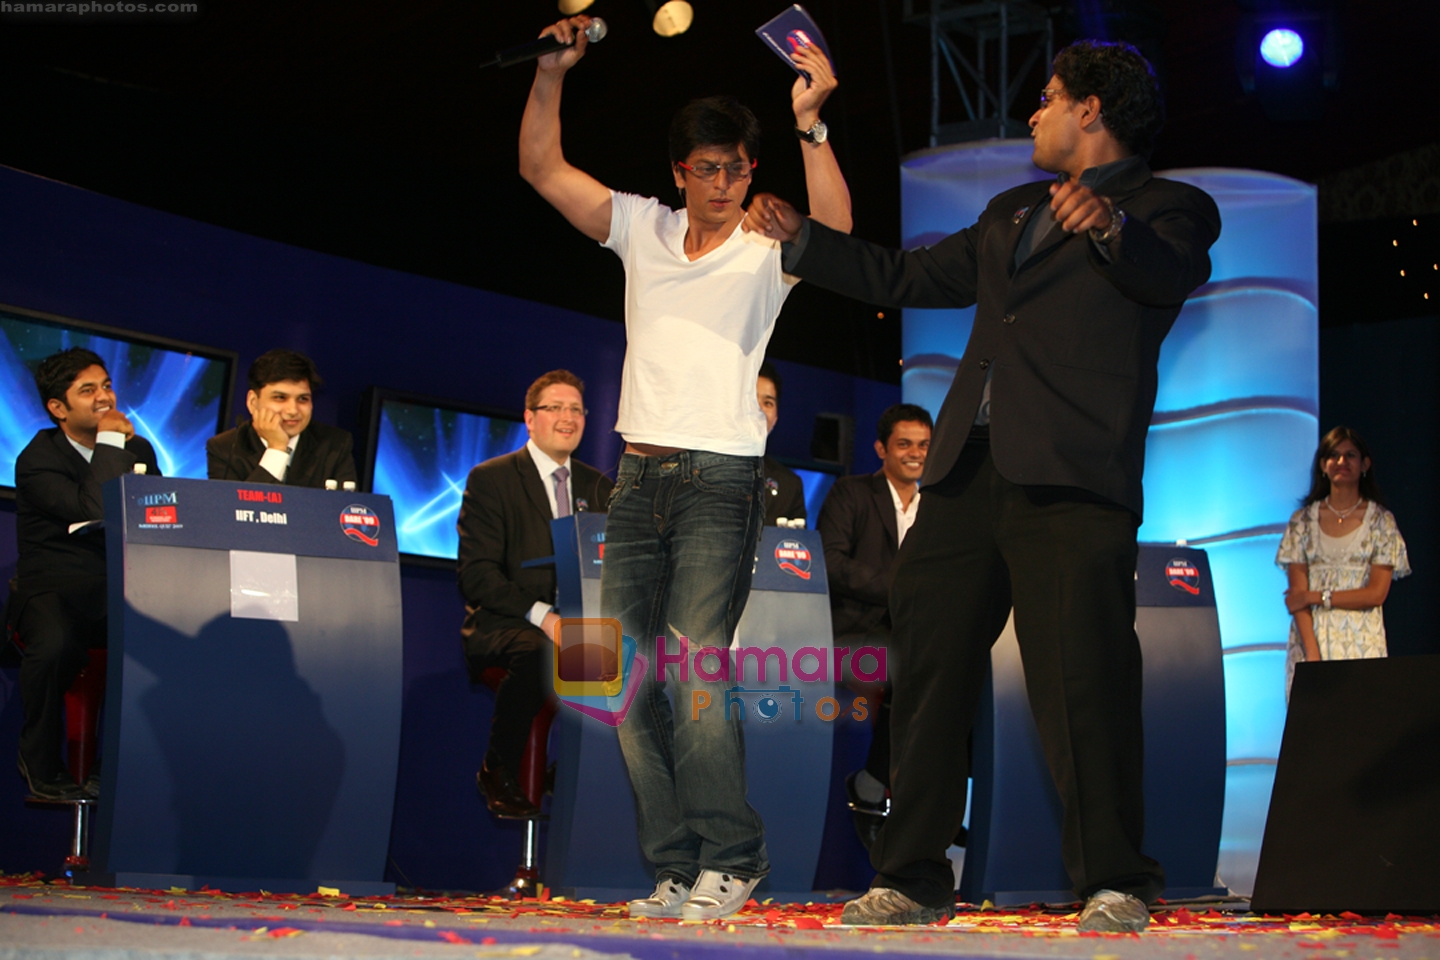 IIPM Quiz hosted by Shahrukh Khan on the 1st of August 